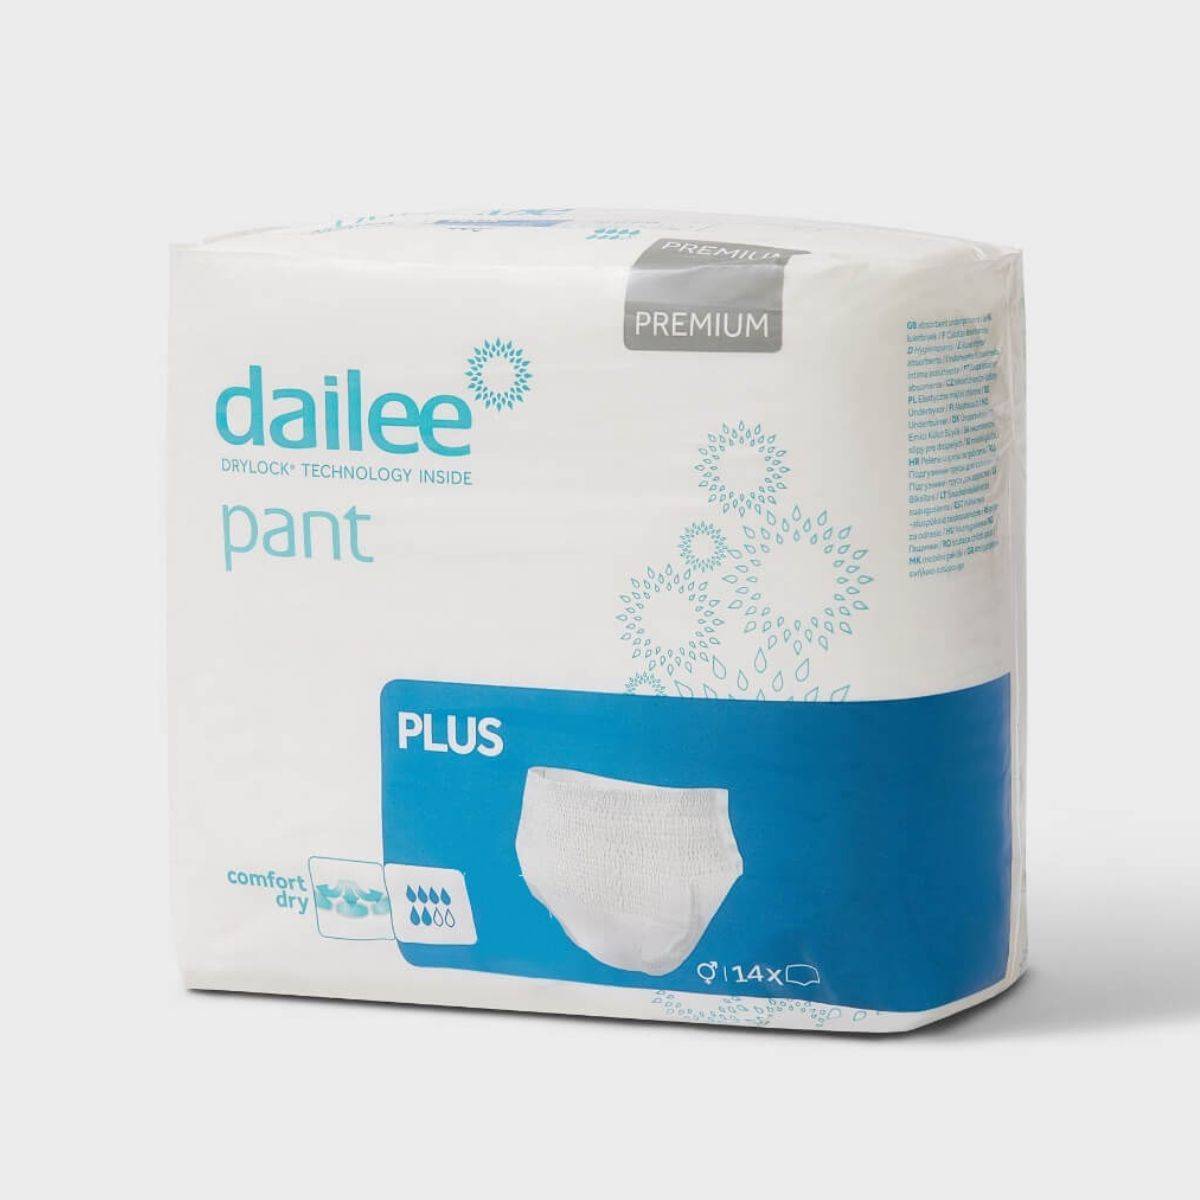 A package of Dailee Pants Plus for incontinence